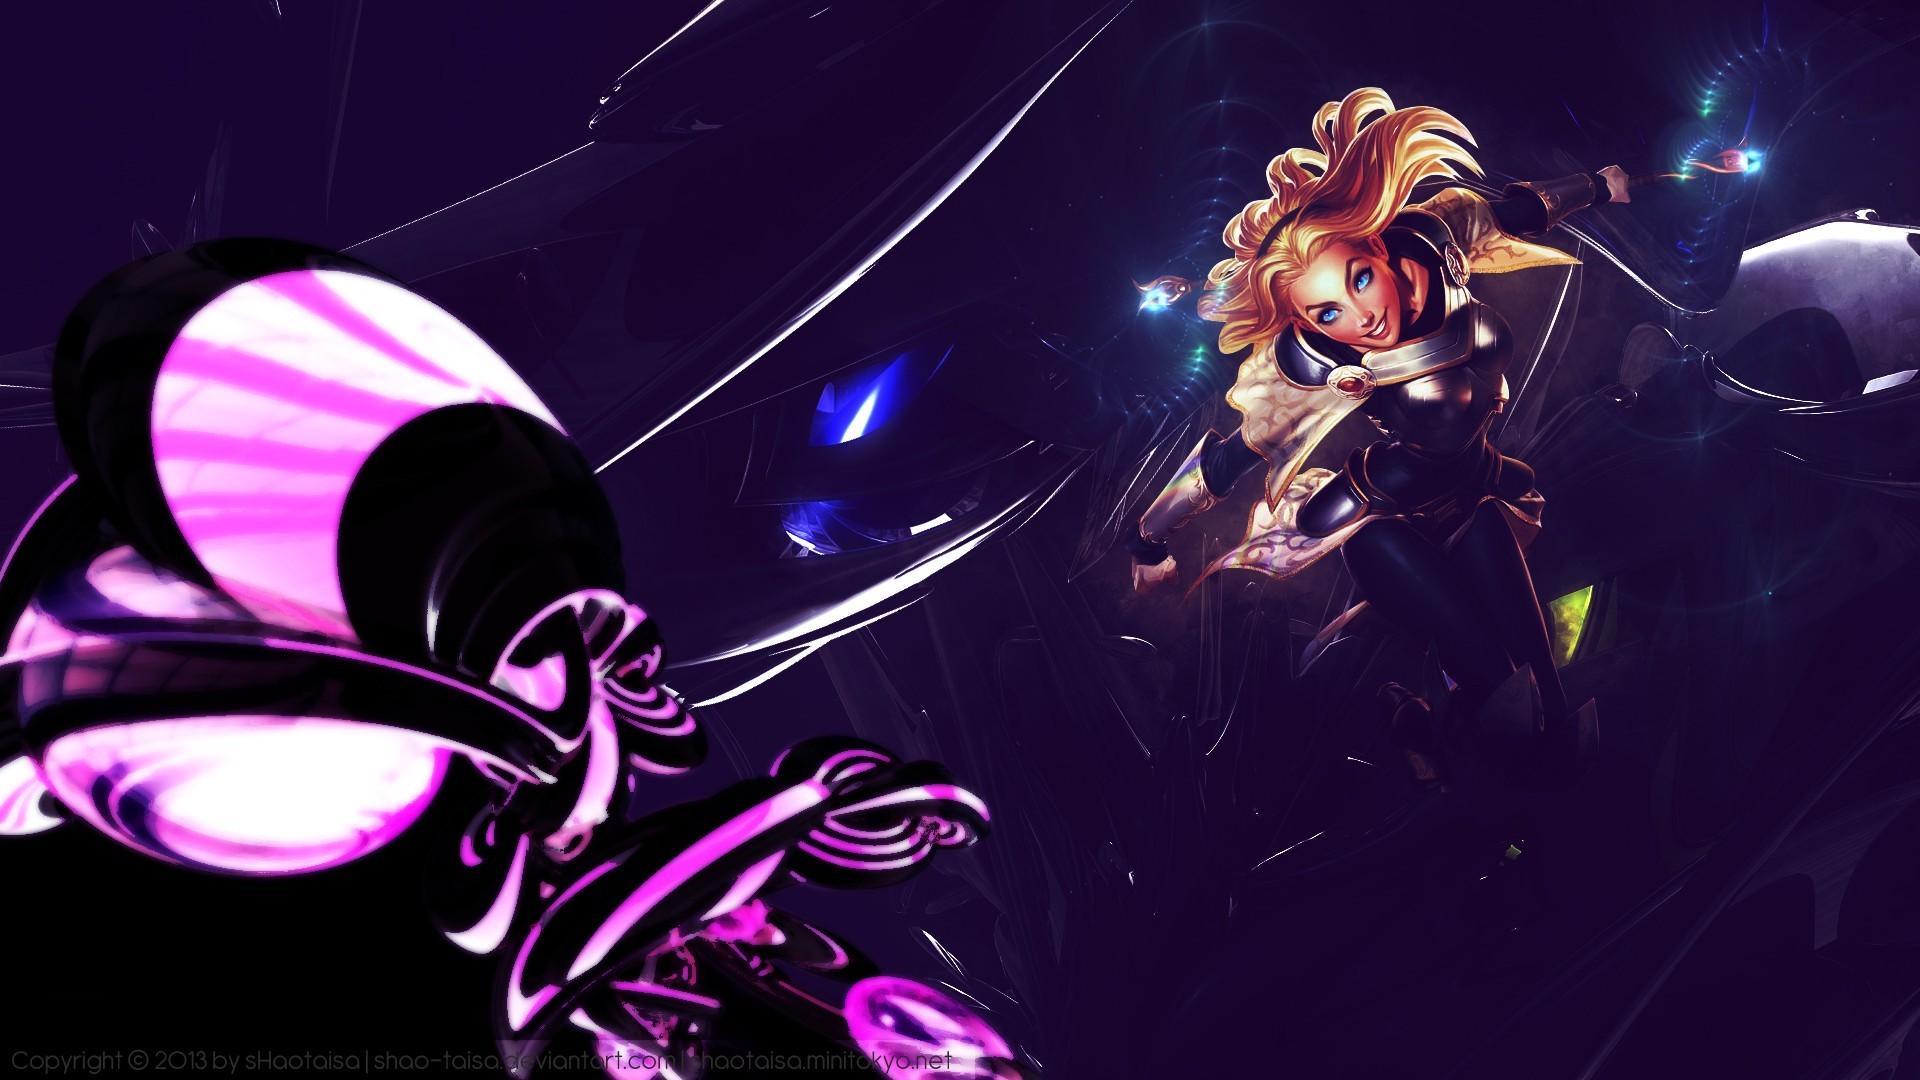 League of legends lux game characters lol wallpaper. AllWallpaper